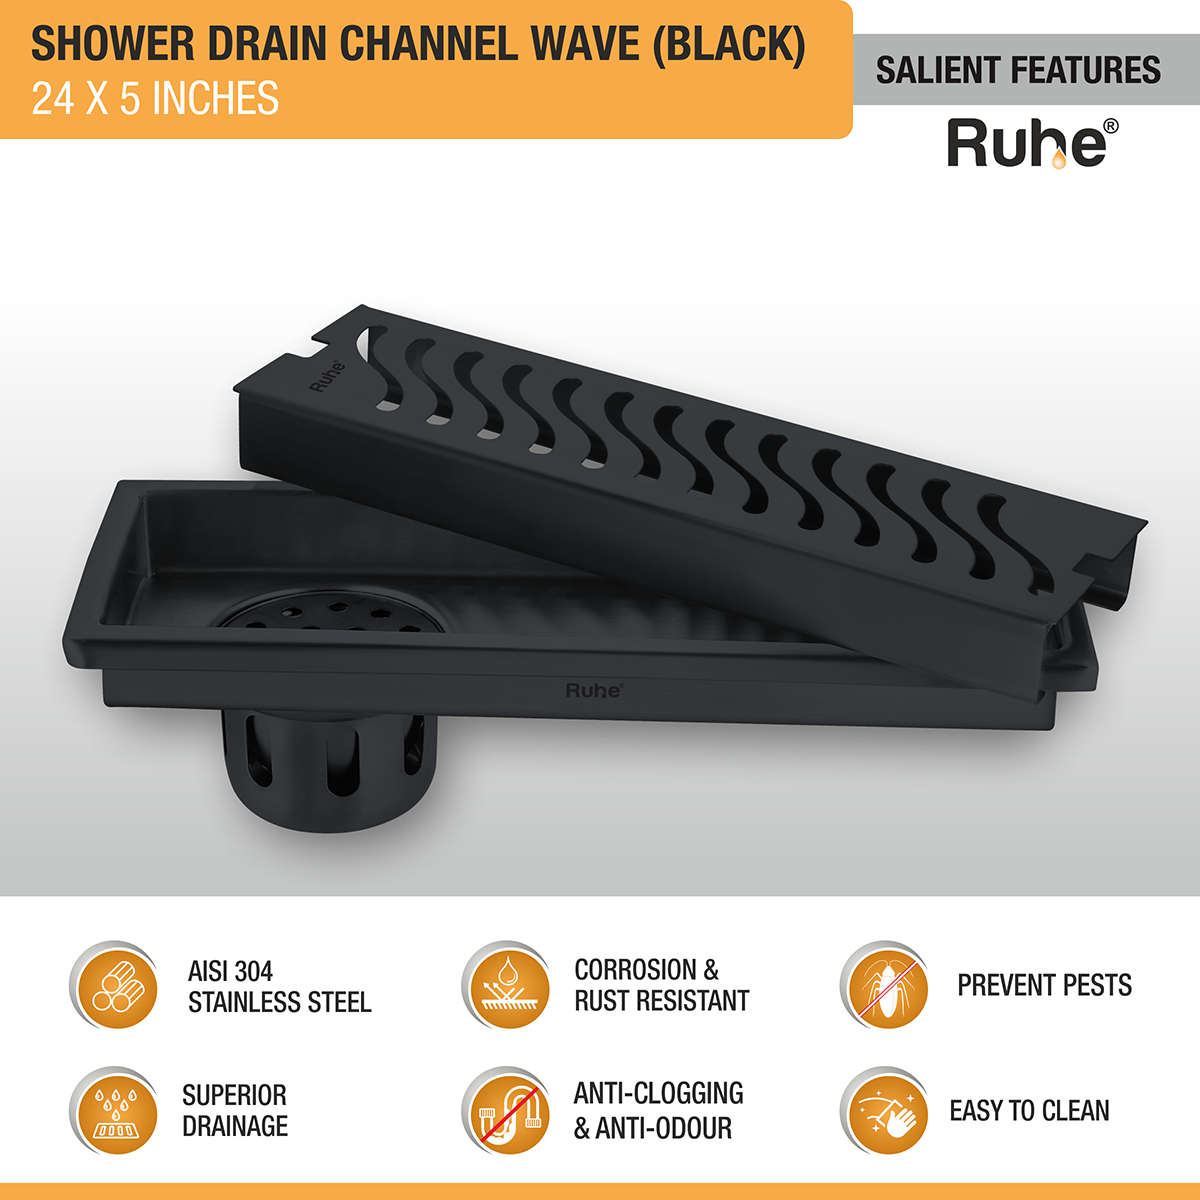 Wave Shower Drain Channel (24 x 5 Inches) Black PVD Coated features and benefits